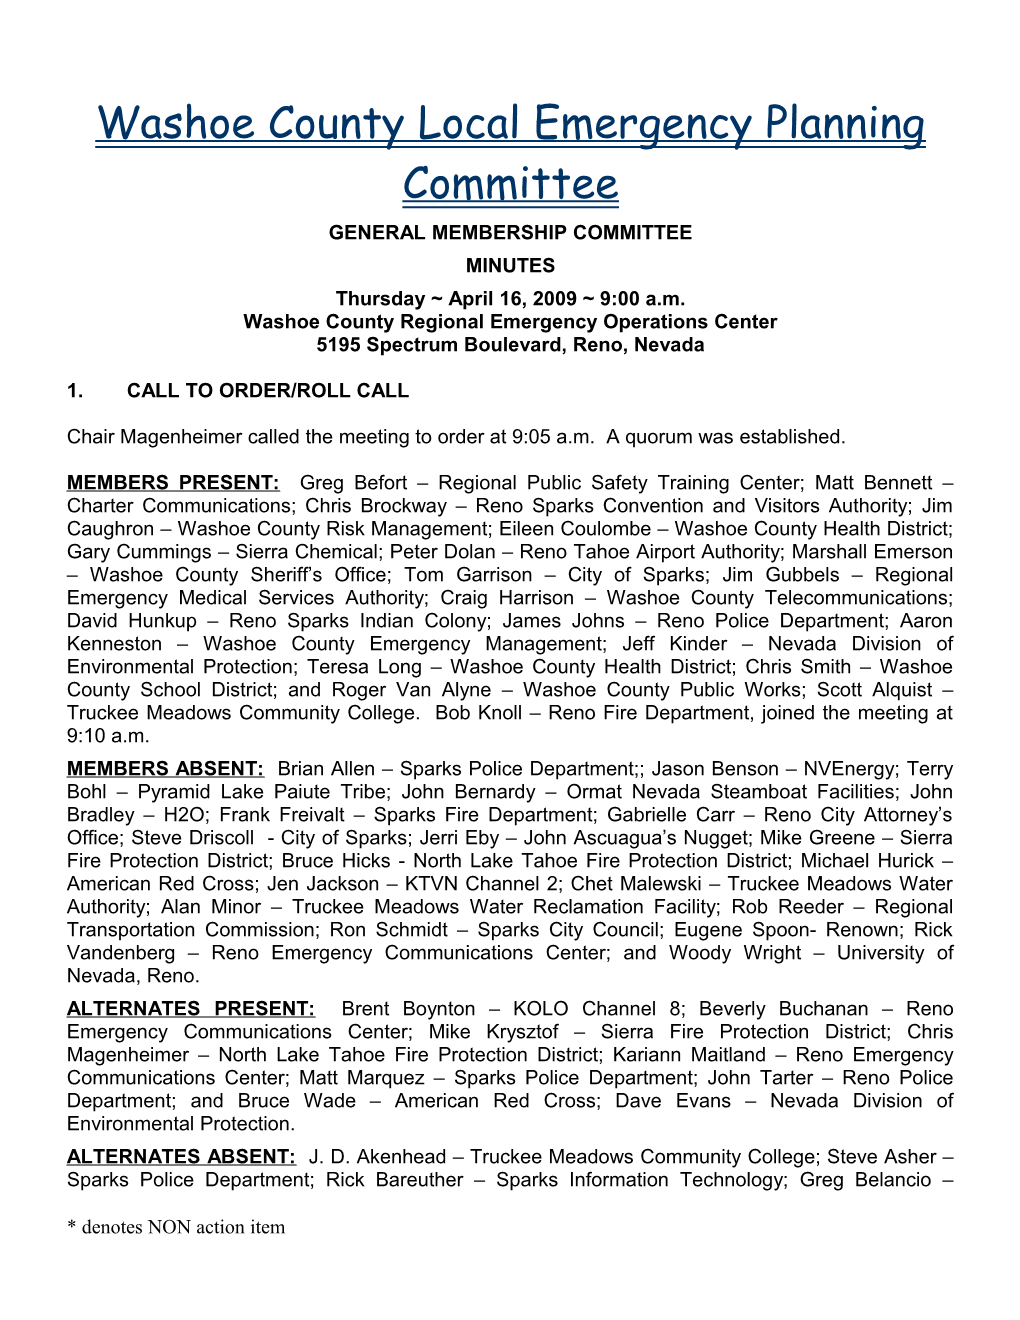 Washoe Local Emergency Planning Committee DRAFT Minutes